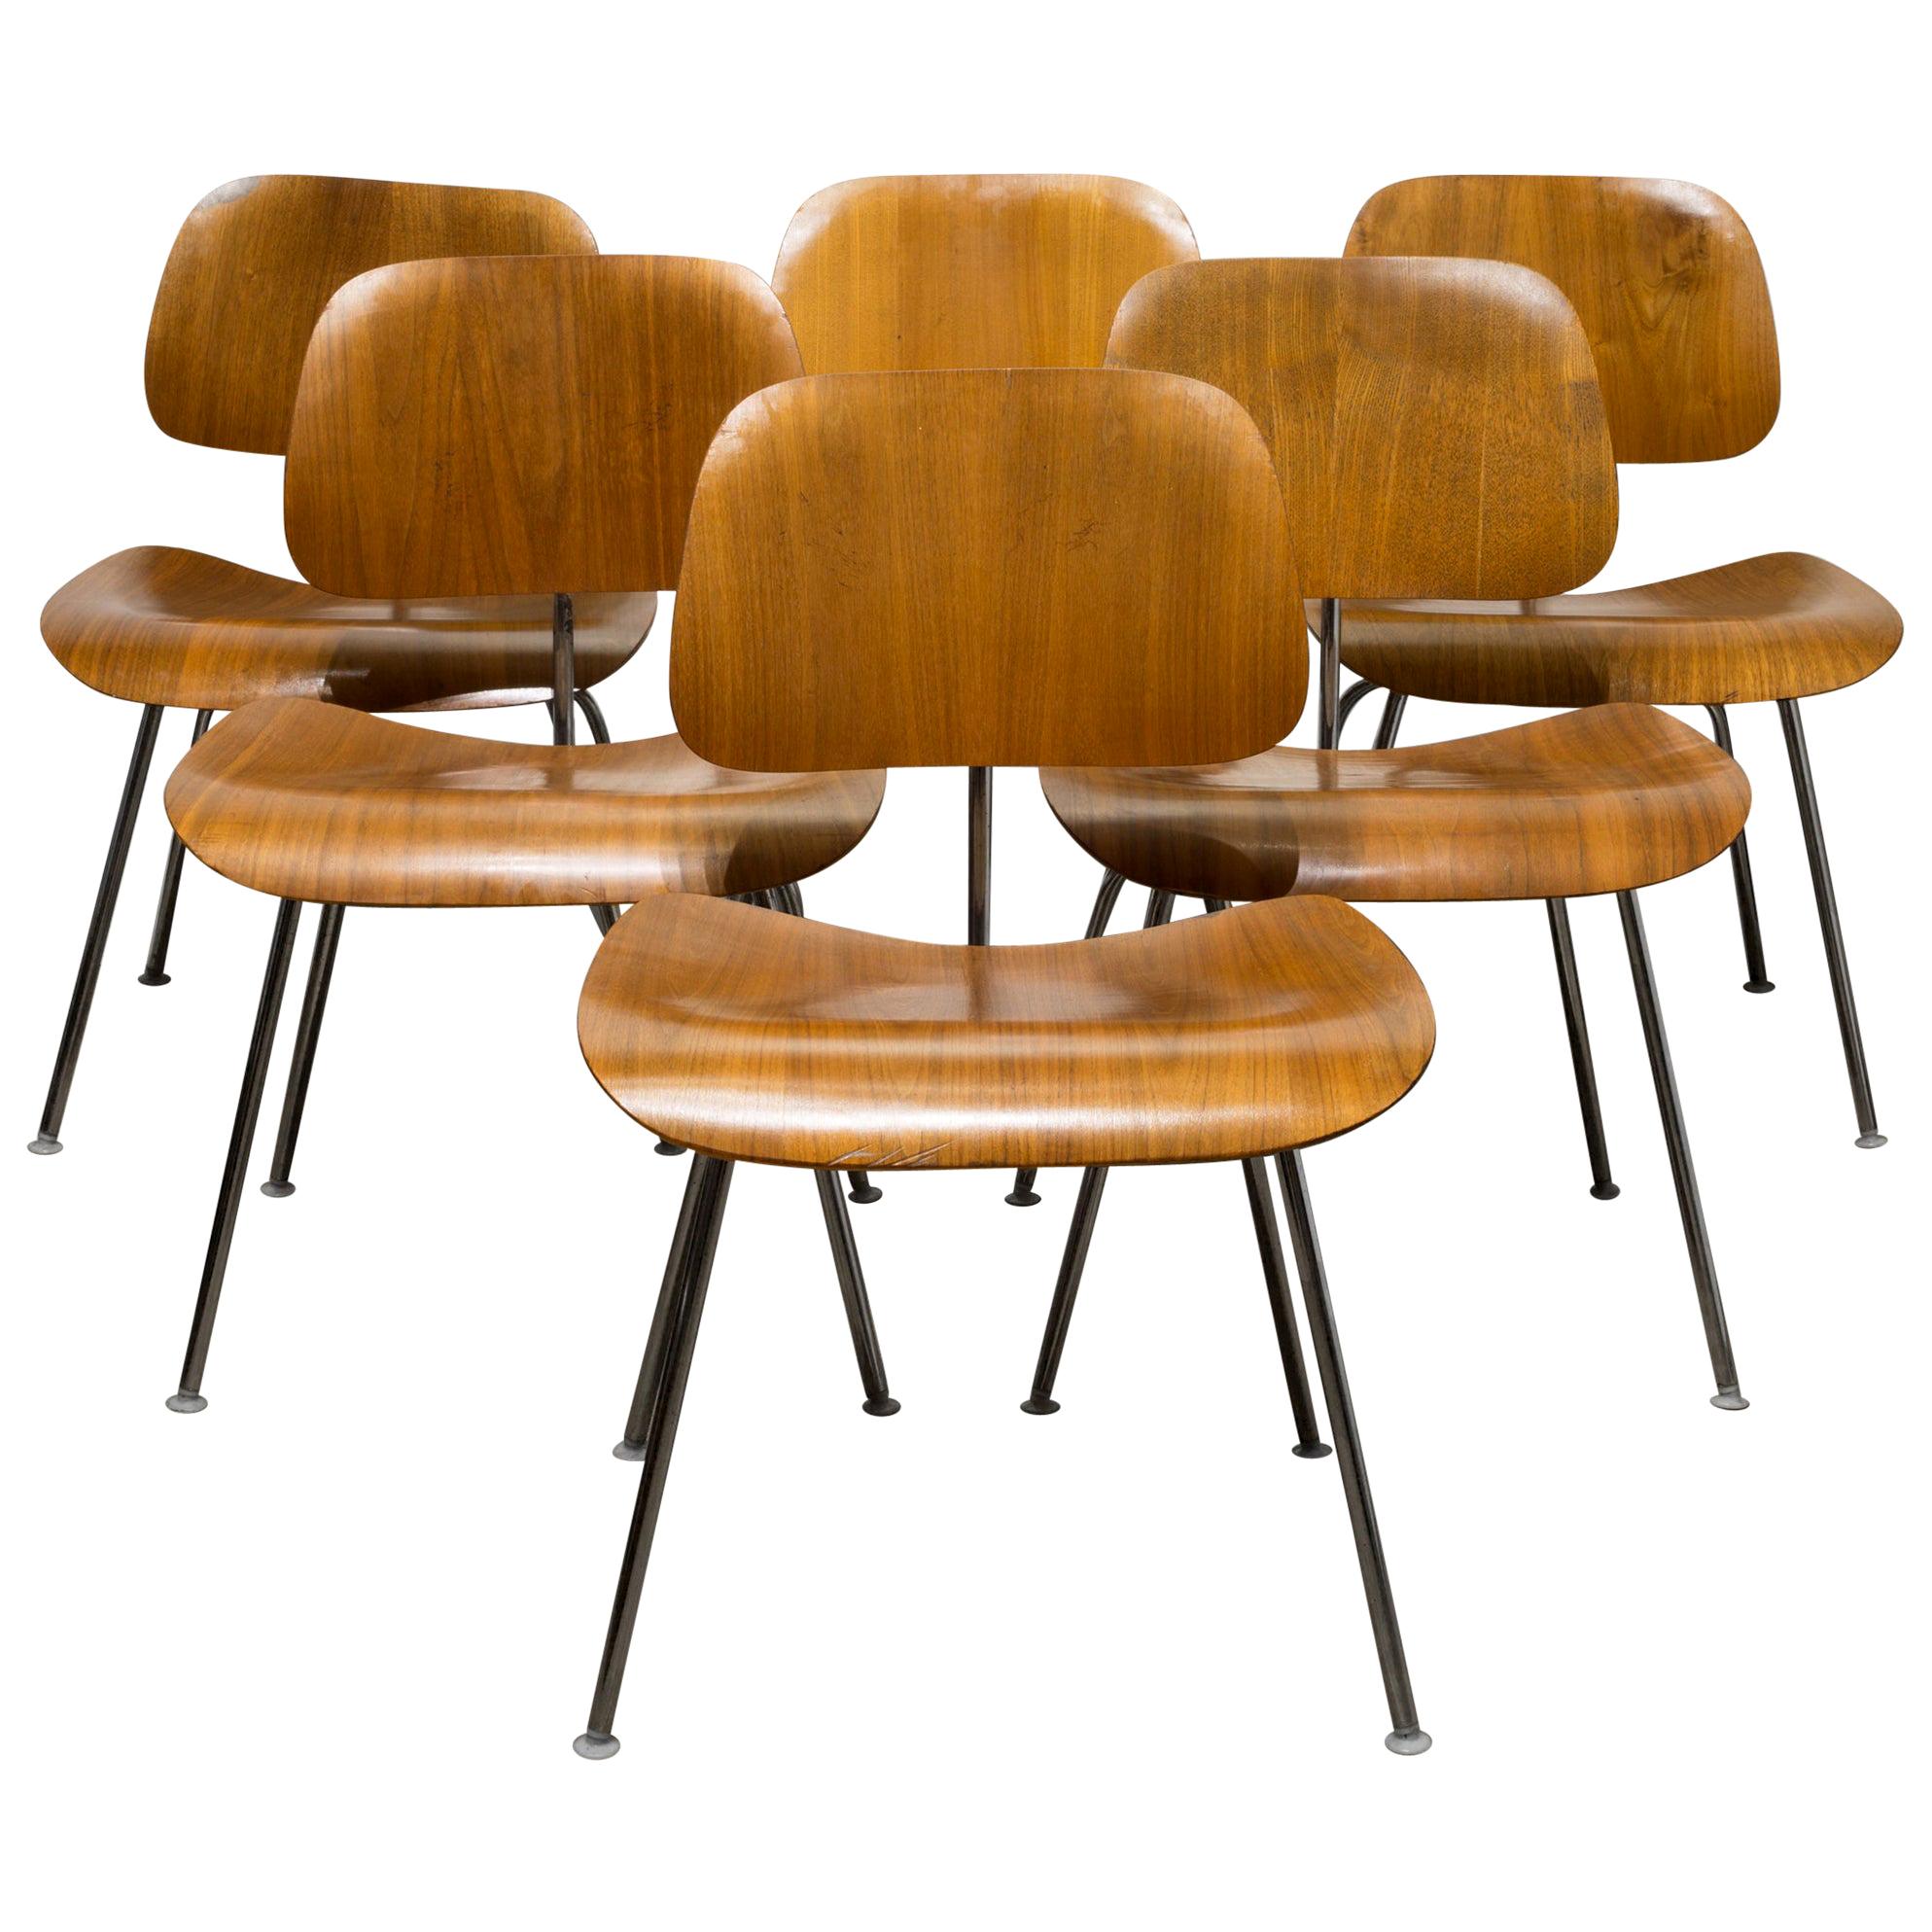 Early Ray and Charles Eames for Herman Miller DCM Chairs, circa 1950s